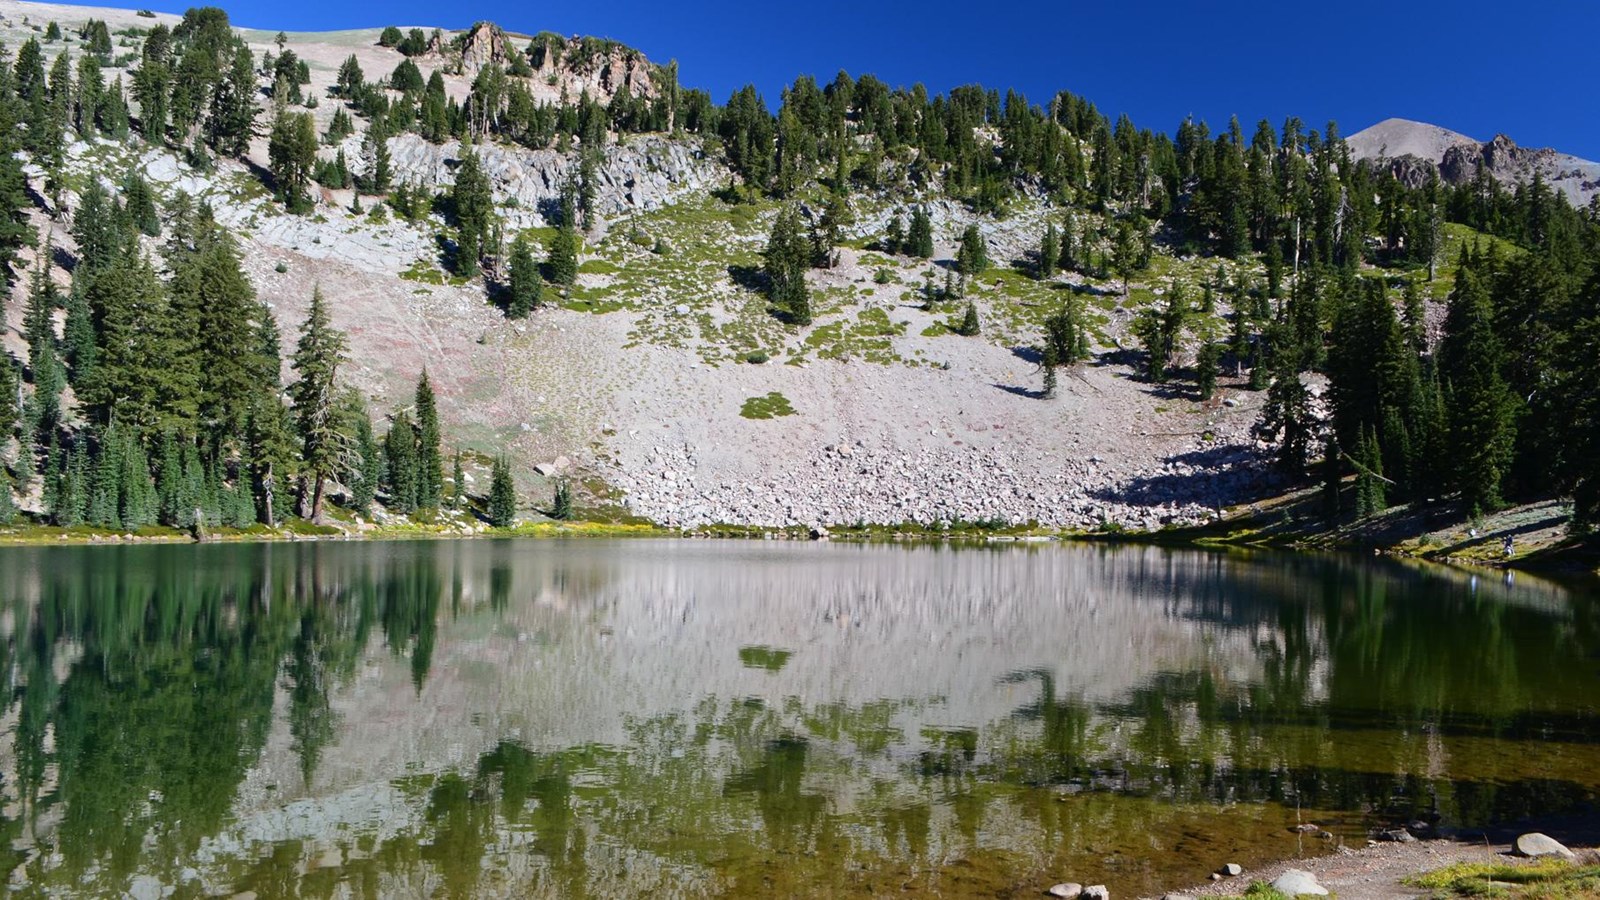 A rocky mountain slope dotted by conifers reflected in a small, green lake.